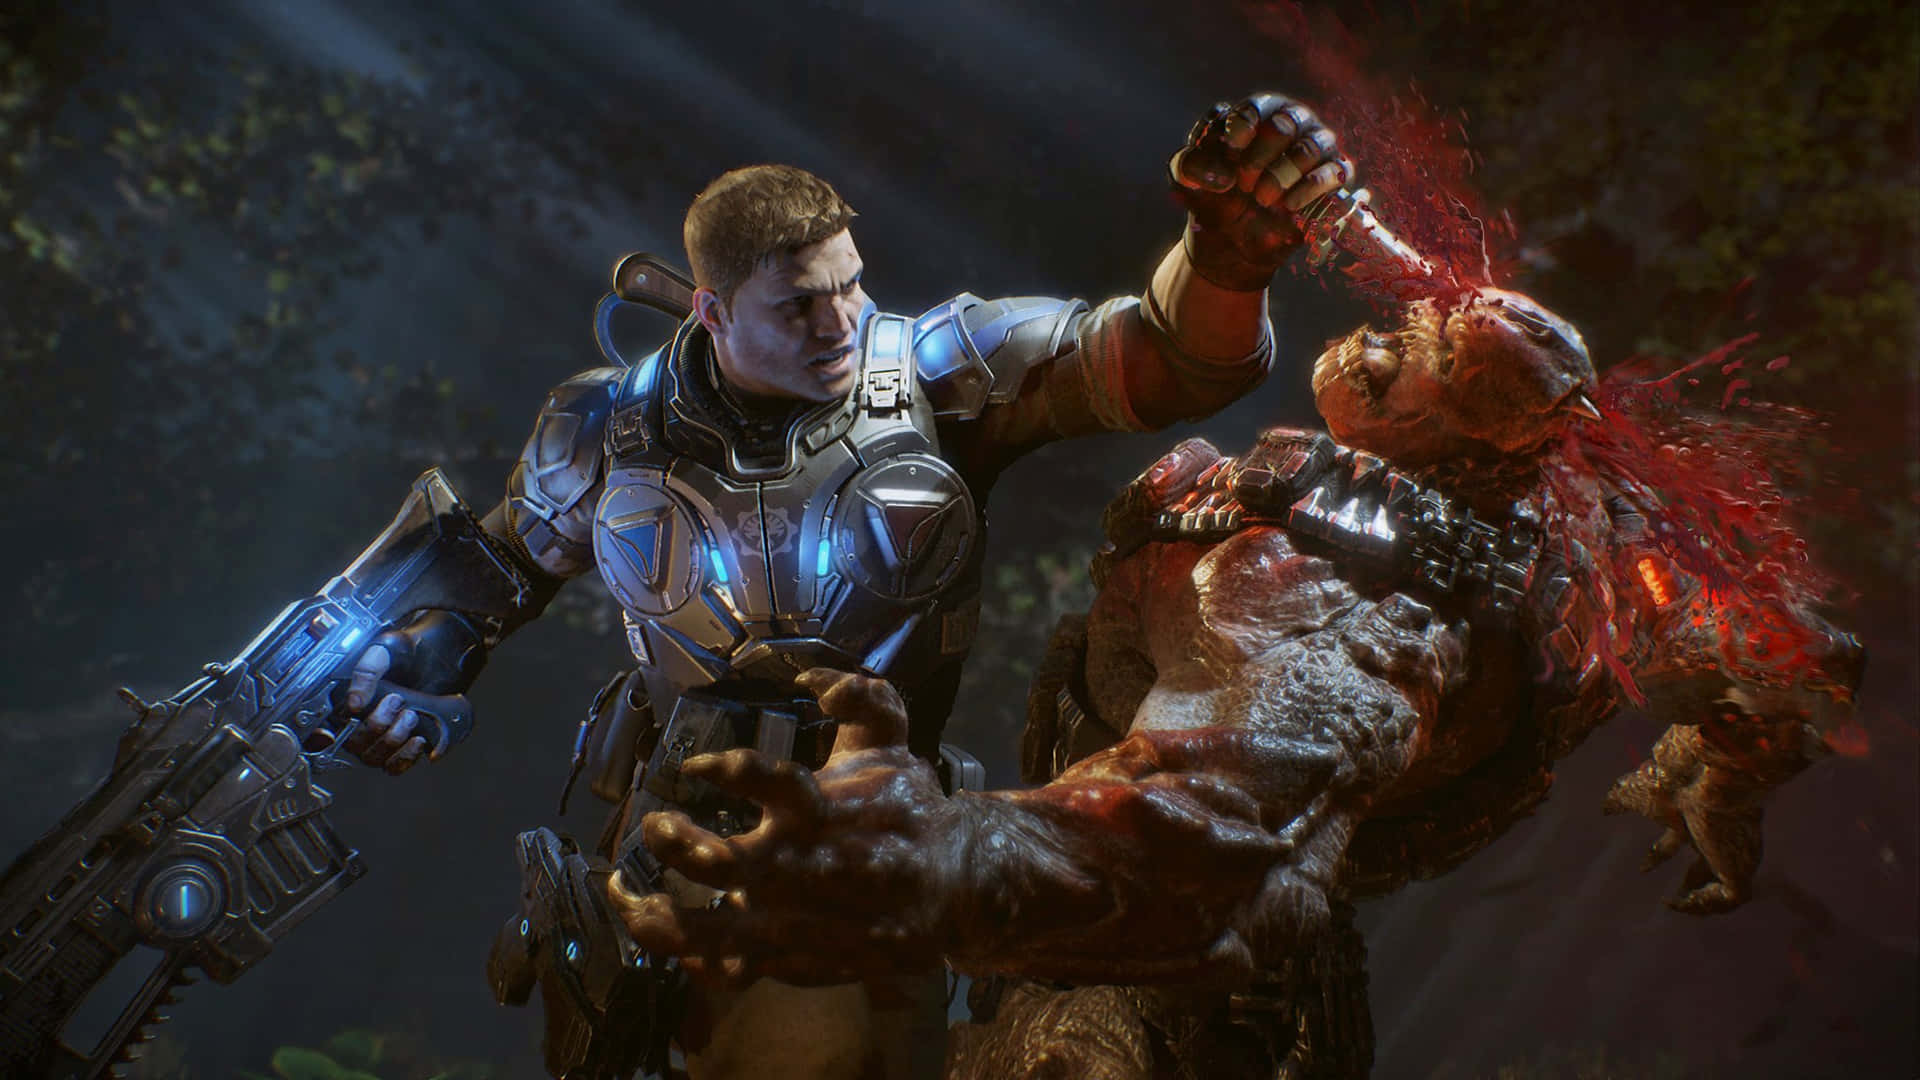 Fight your way to victory with the best Gears of War 5